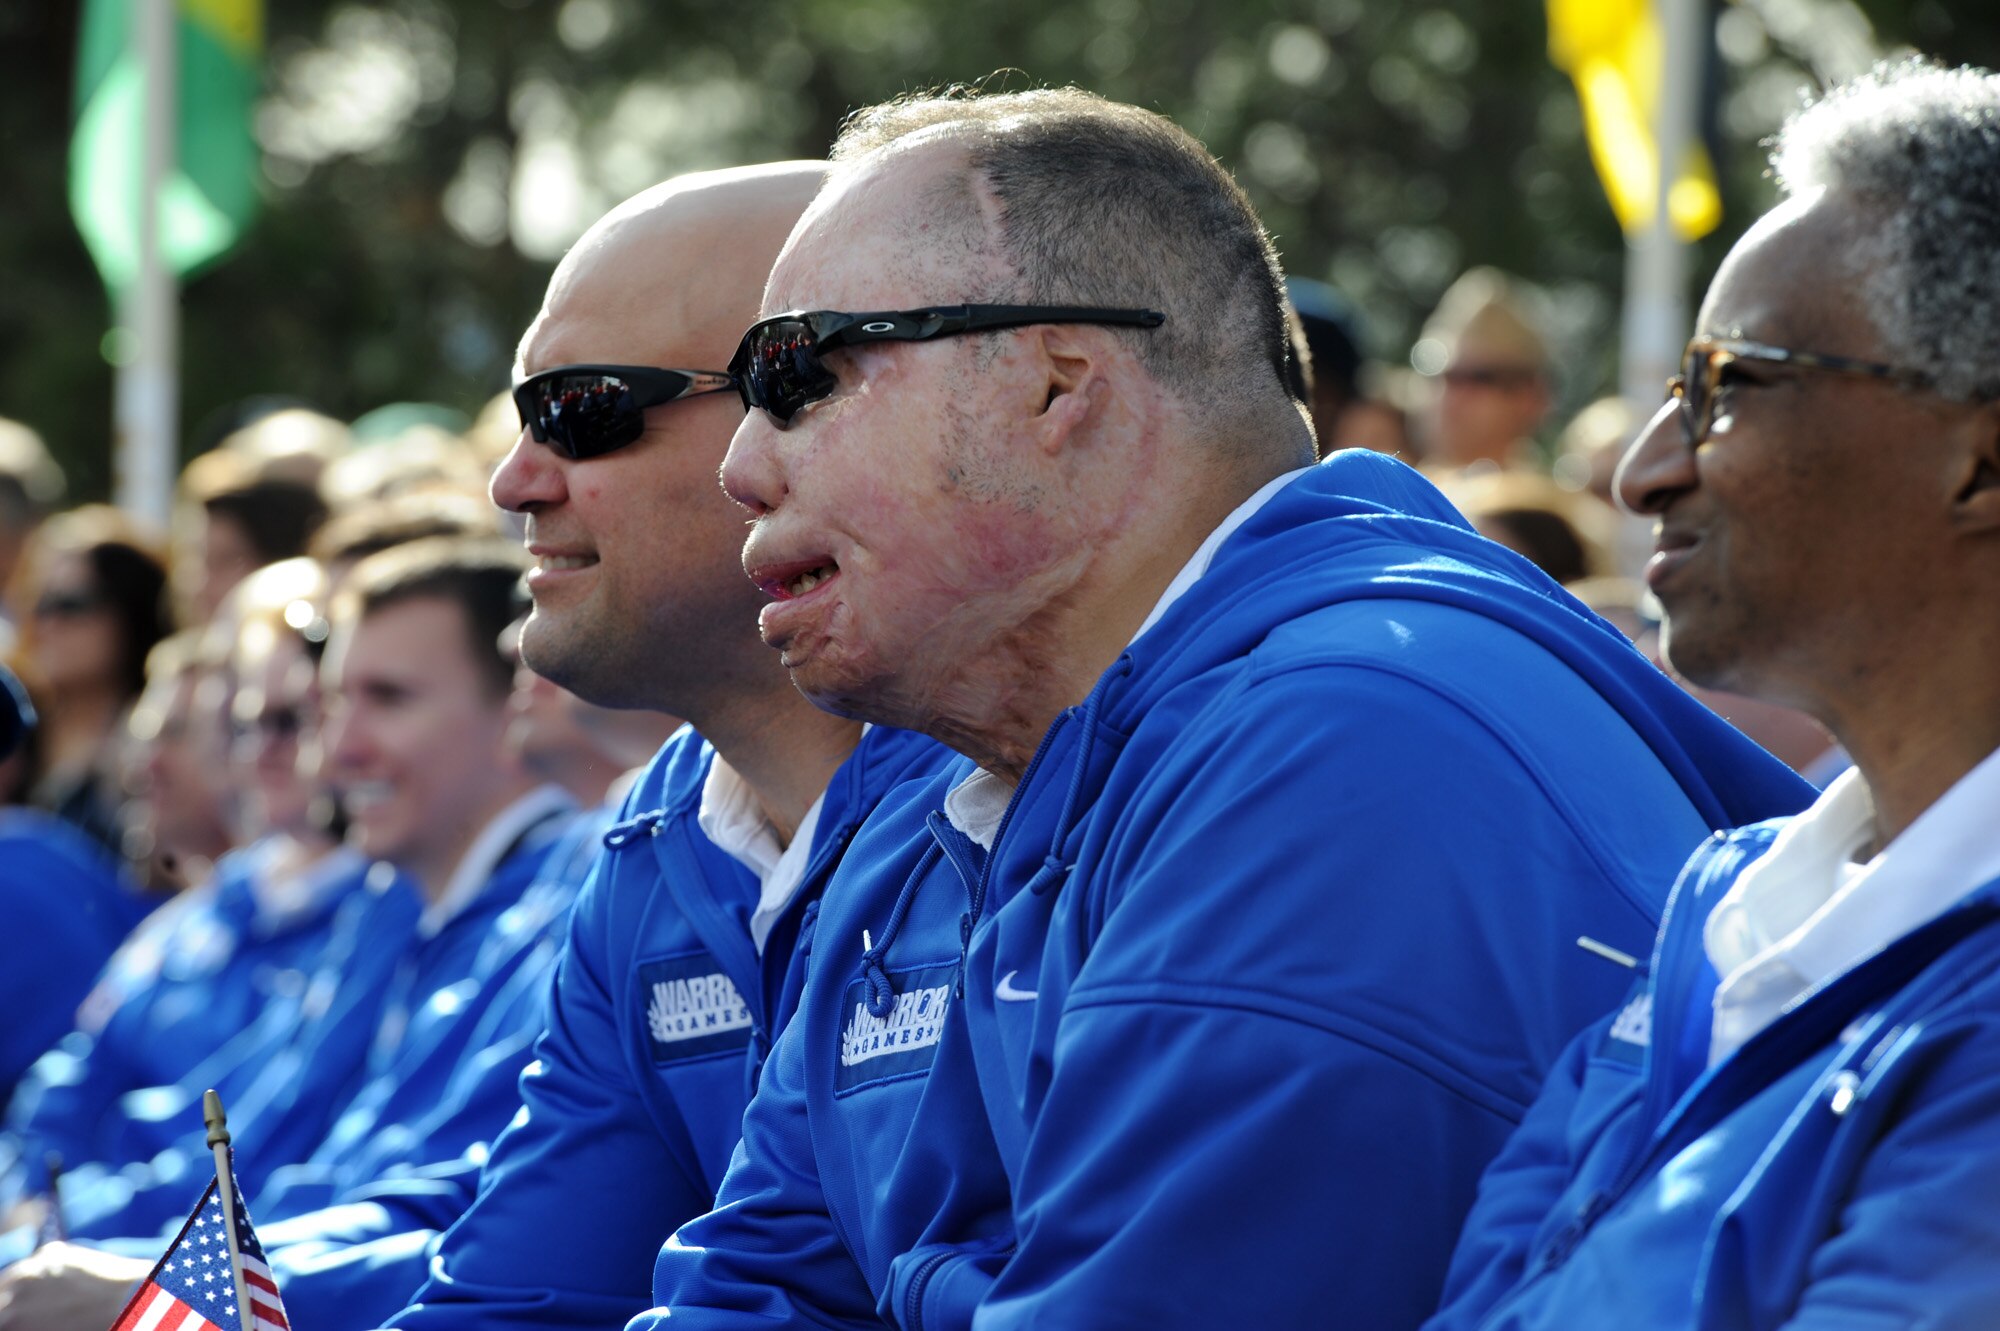 Members of the Air Force team listen as Navy Adm. James Winnefeld speaks during the opening ceremony of the 2011 Warrior Games May 16, 2011, at the U.S. Olympic Training Center in Colorado Springs, Colo. Some 200 wounded warriors and disabled veterans from all the military services are competing in paralympic-style athletic events May 16 through May 21. (U.S. Air Force photo/Staff Sgt. Desiree N. Palacios)
